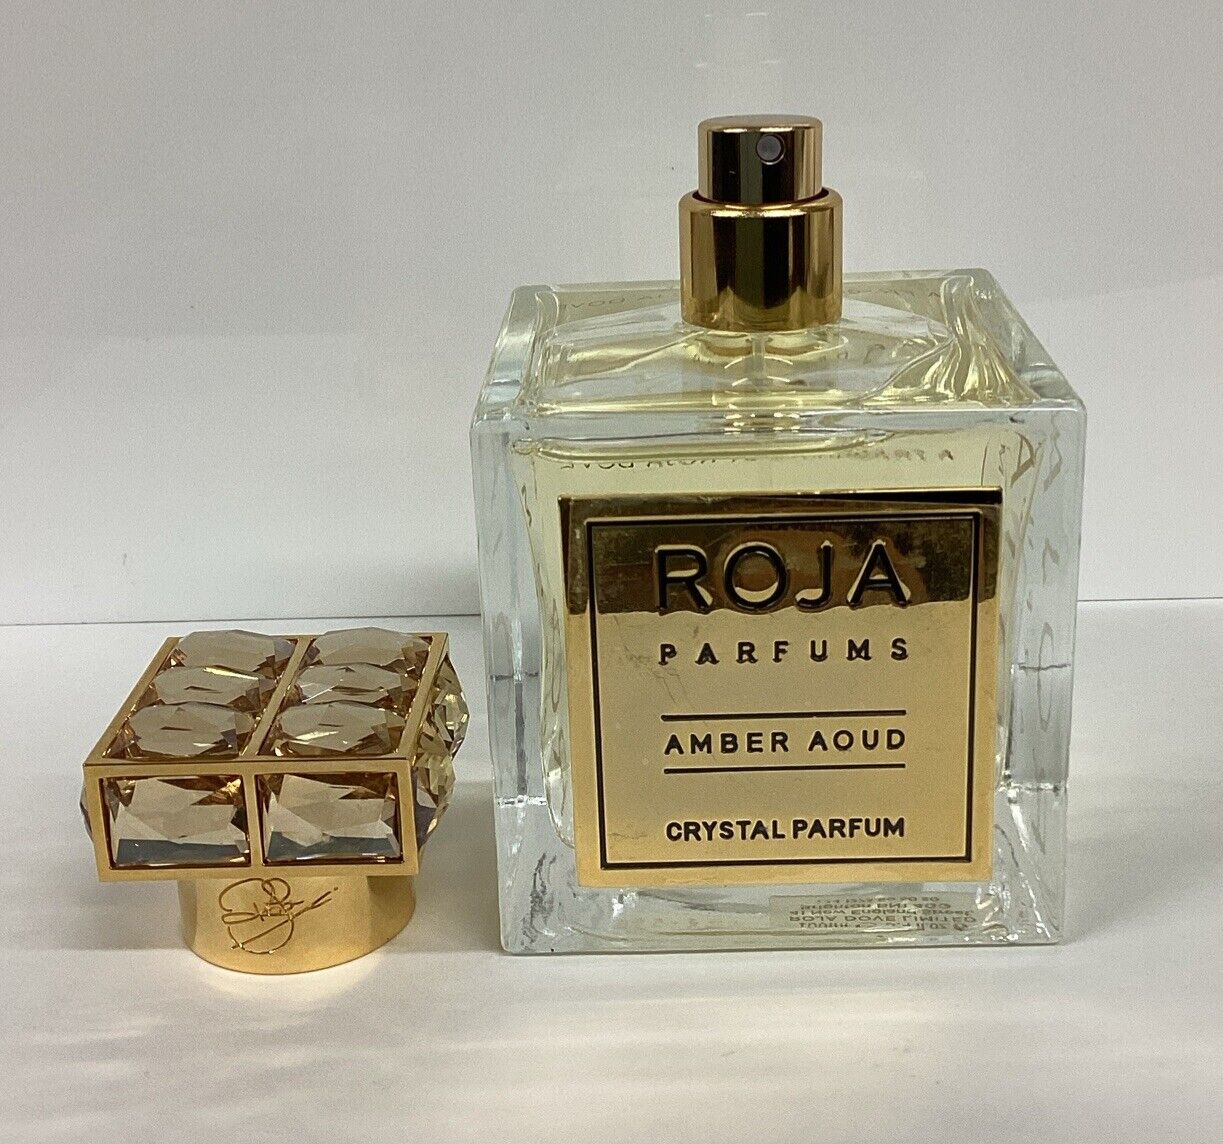 Roja Amber Oud Crystal Parfum 3.4oz As Pictured, No Box